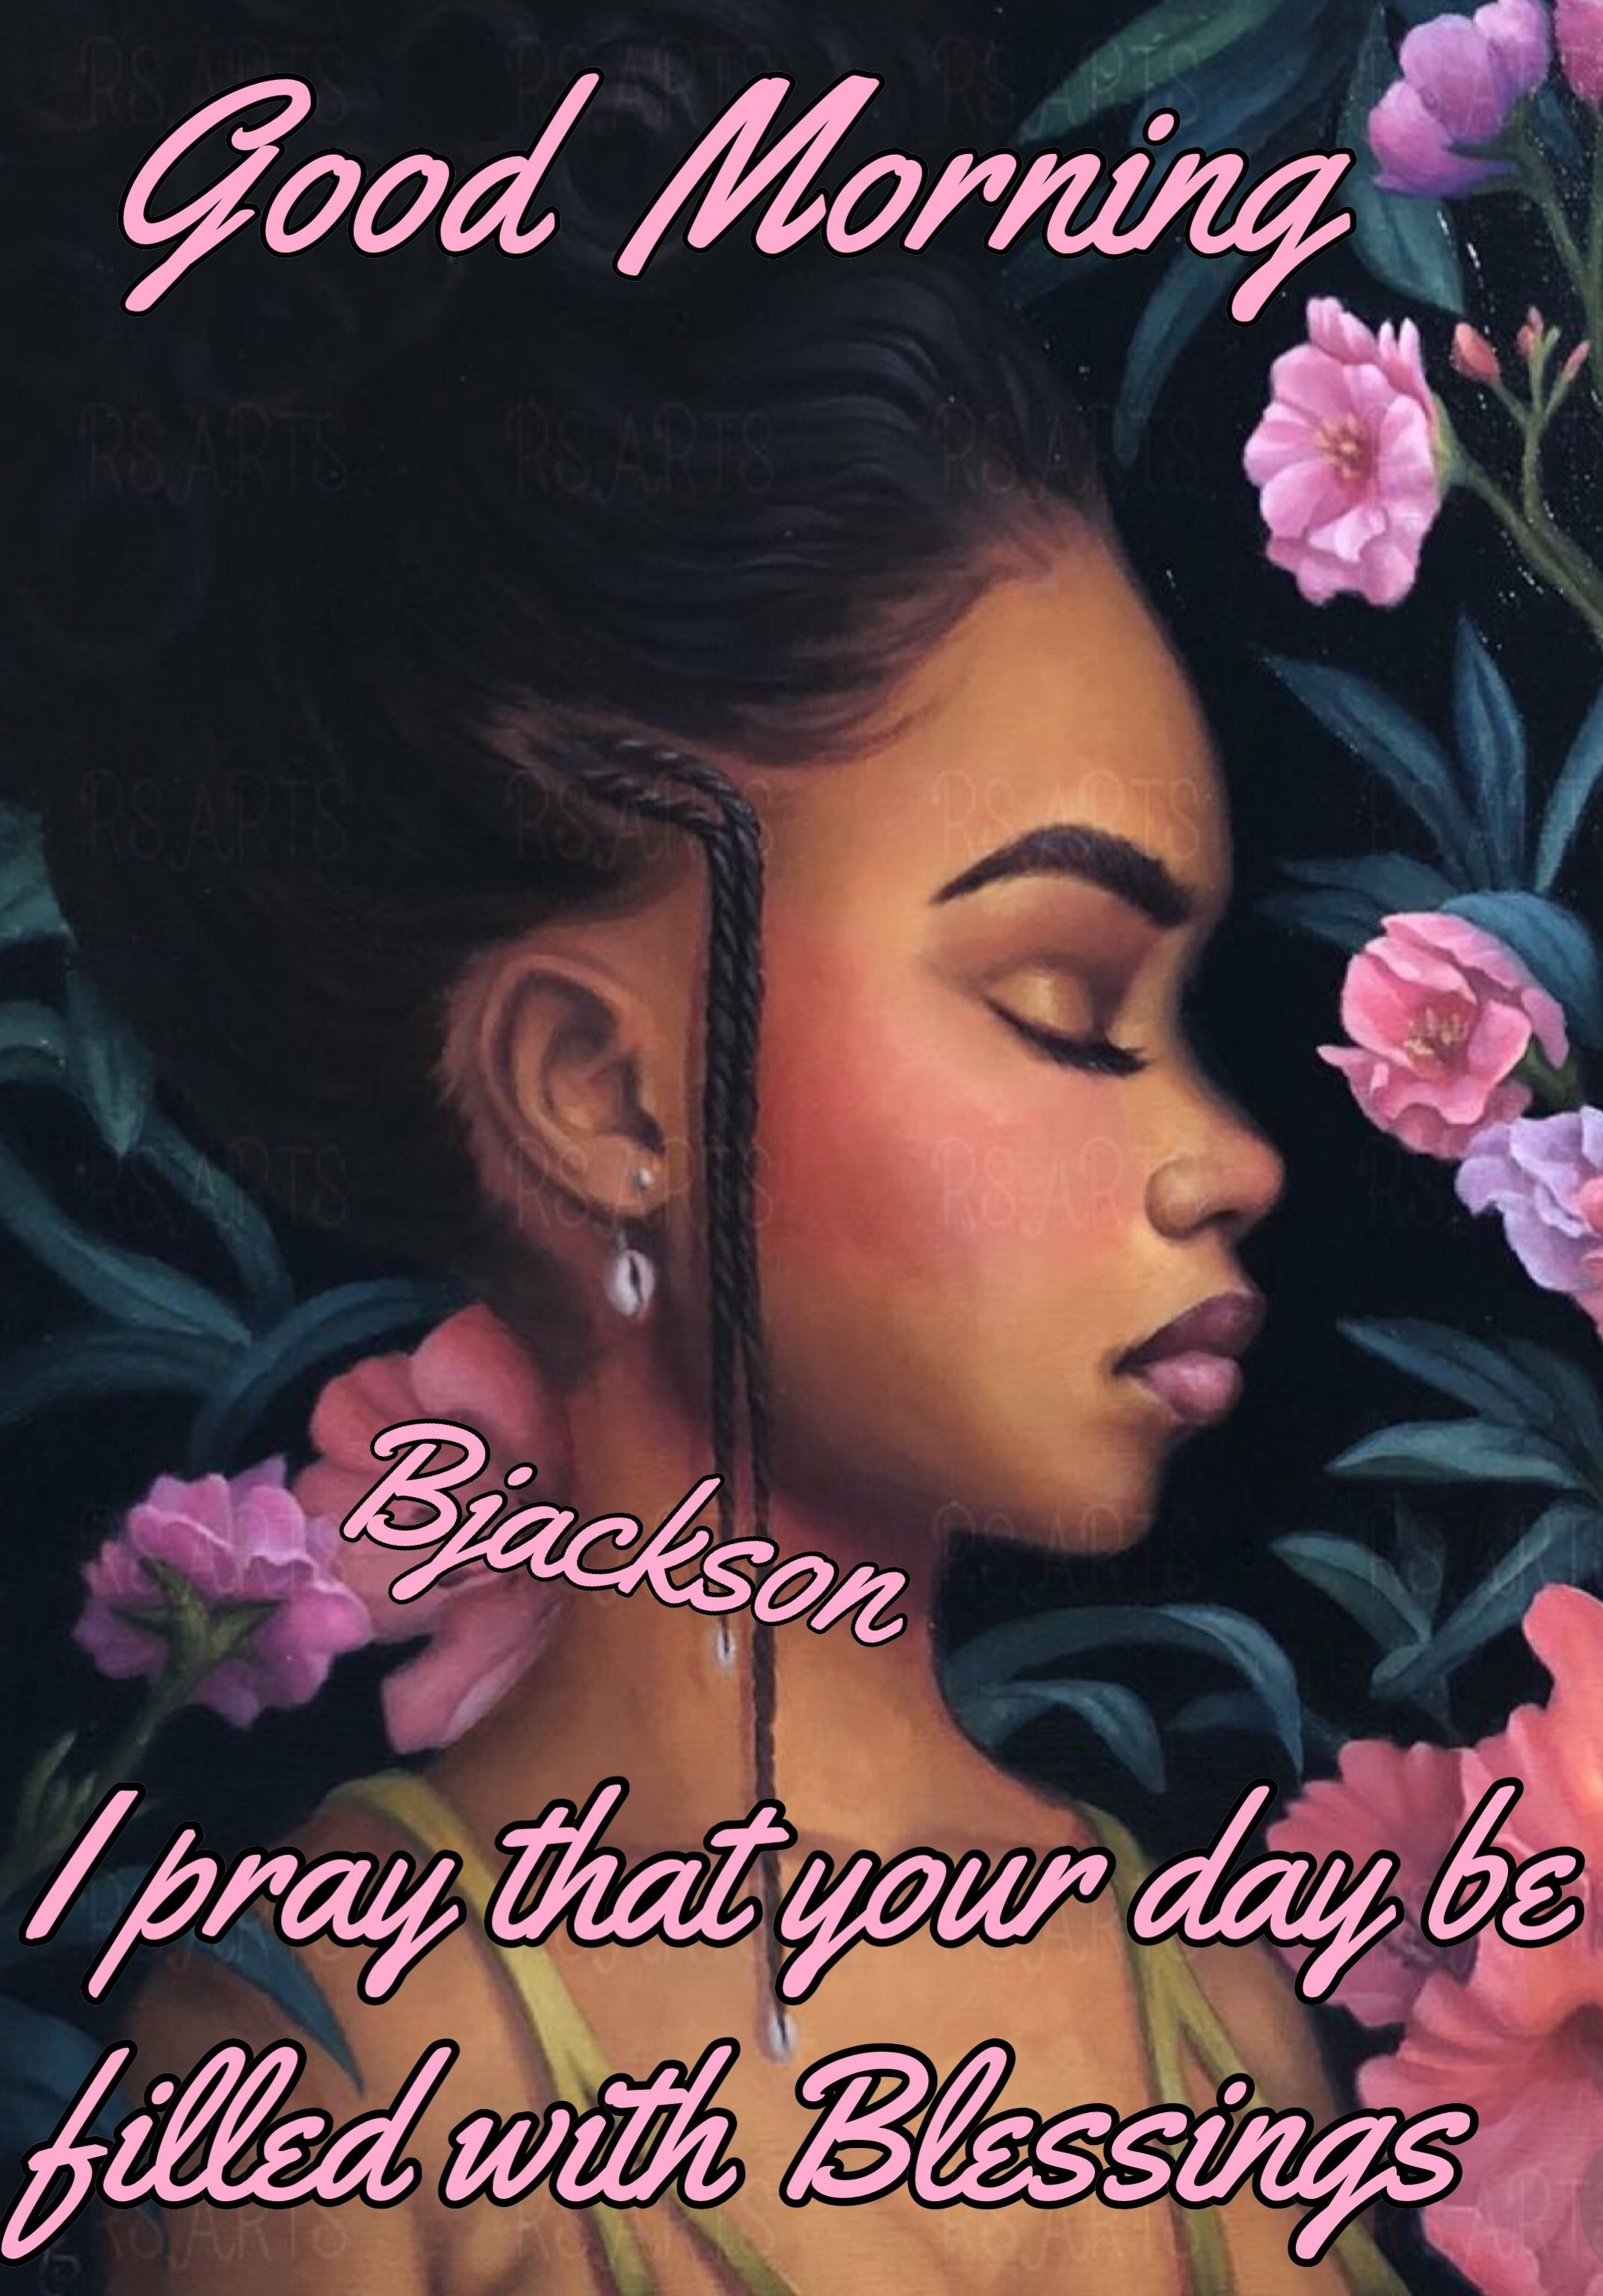 Thursday Quotes, Prayer Times, Prayers For Healing, - Happy Thursday African American - HD Wallpaper 